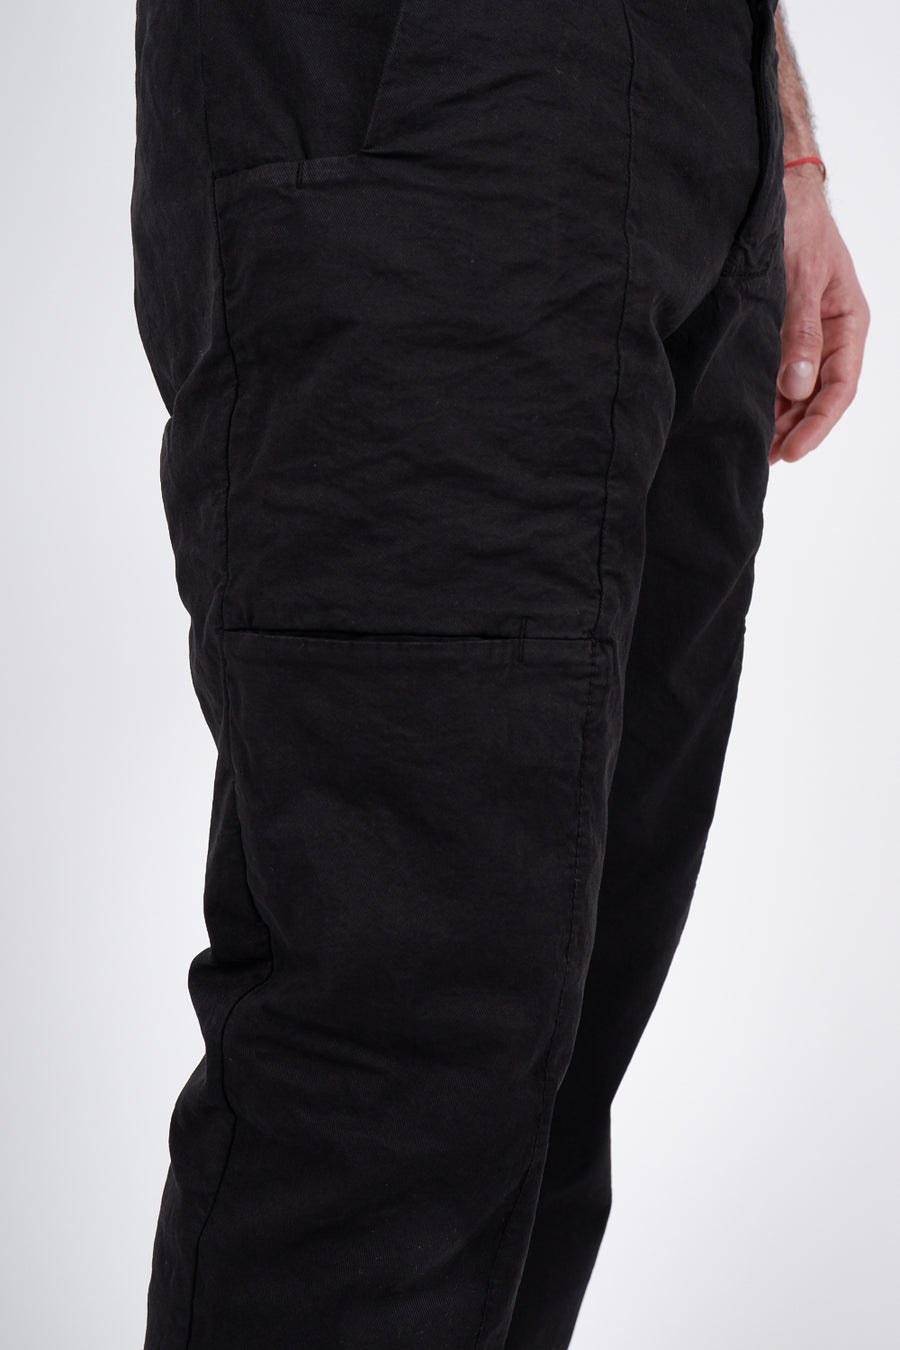 Buy the Transit Italian Cotton Slip Pocket Detail Chino in Black at Intro. Spend £50 for free UK delivery. Official stockists. We ship worldwide.